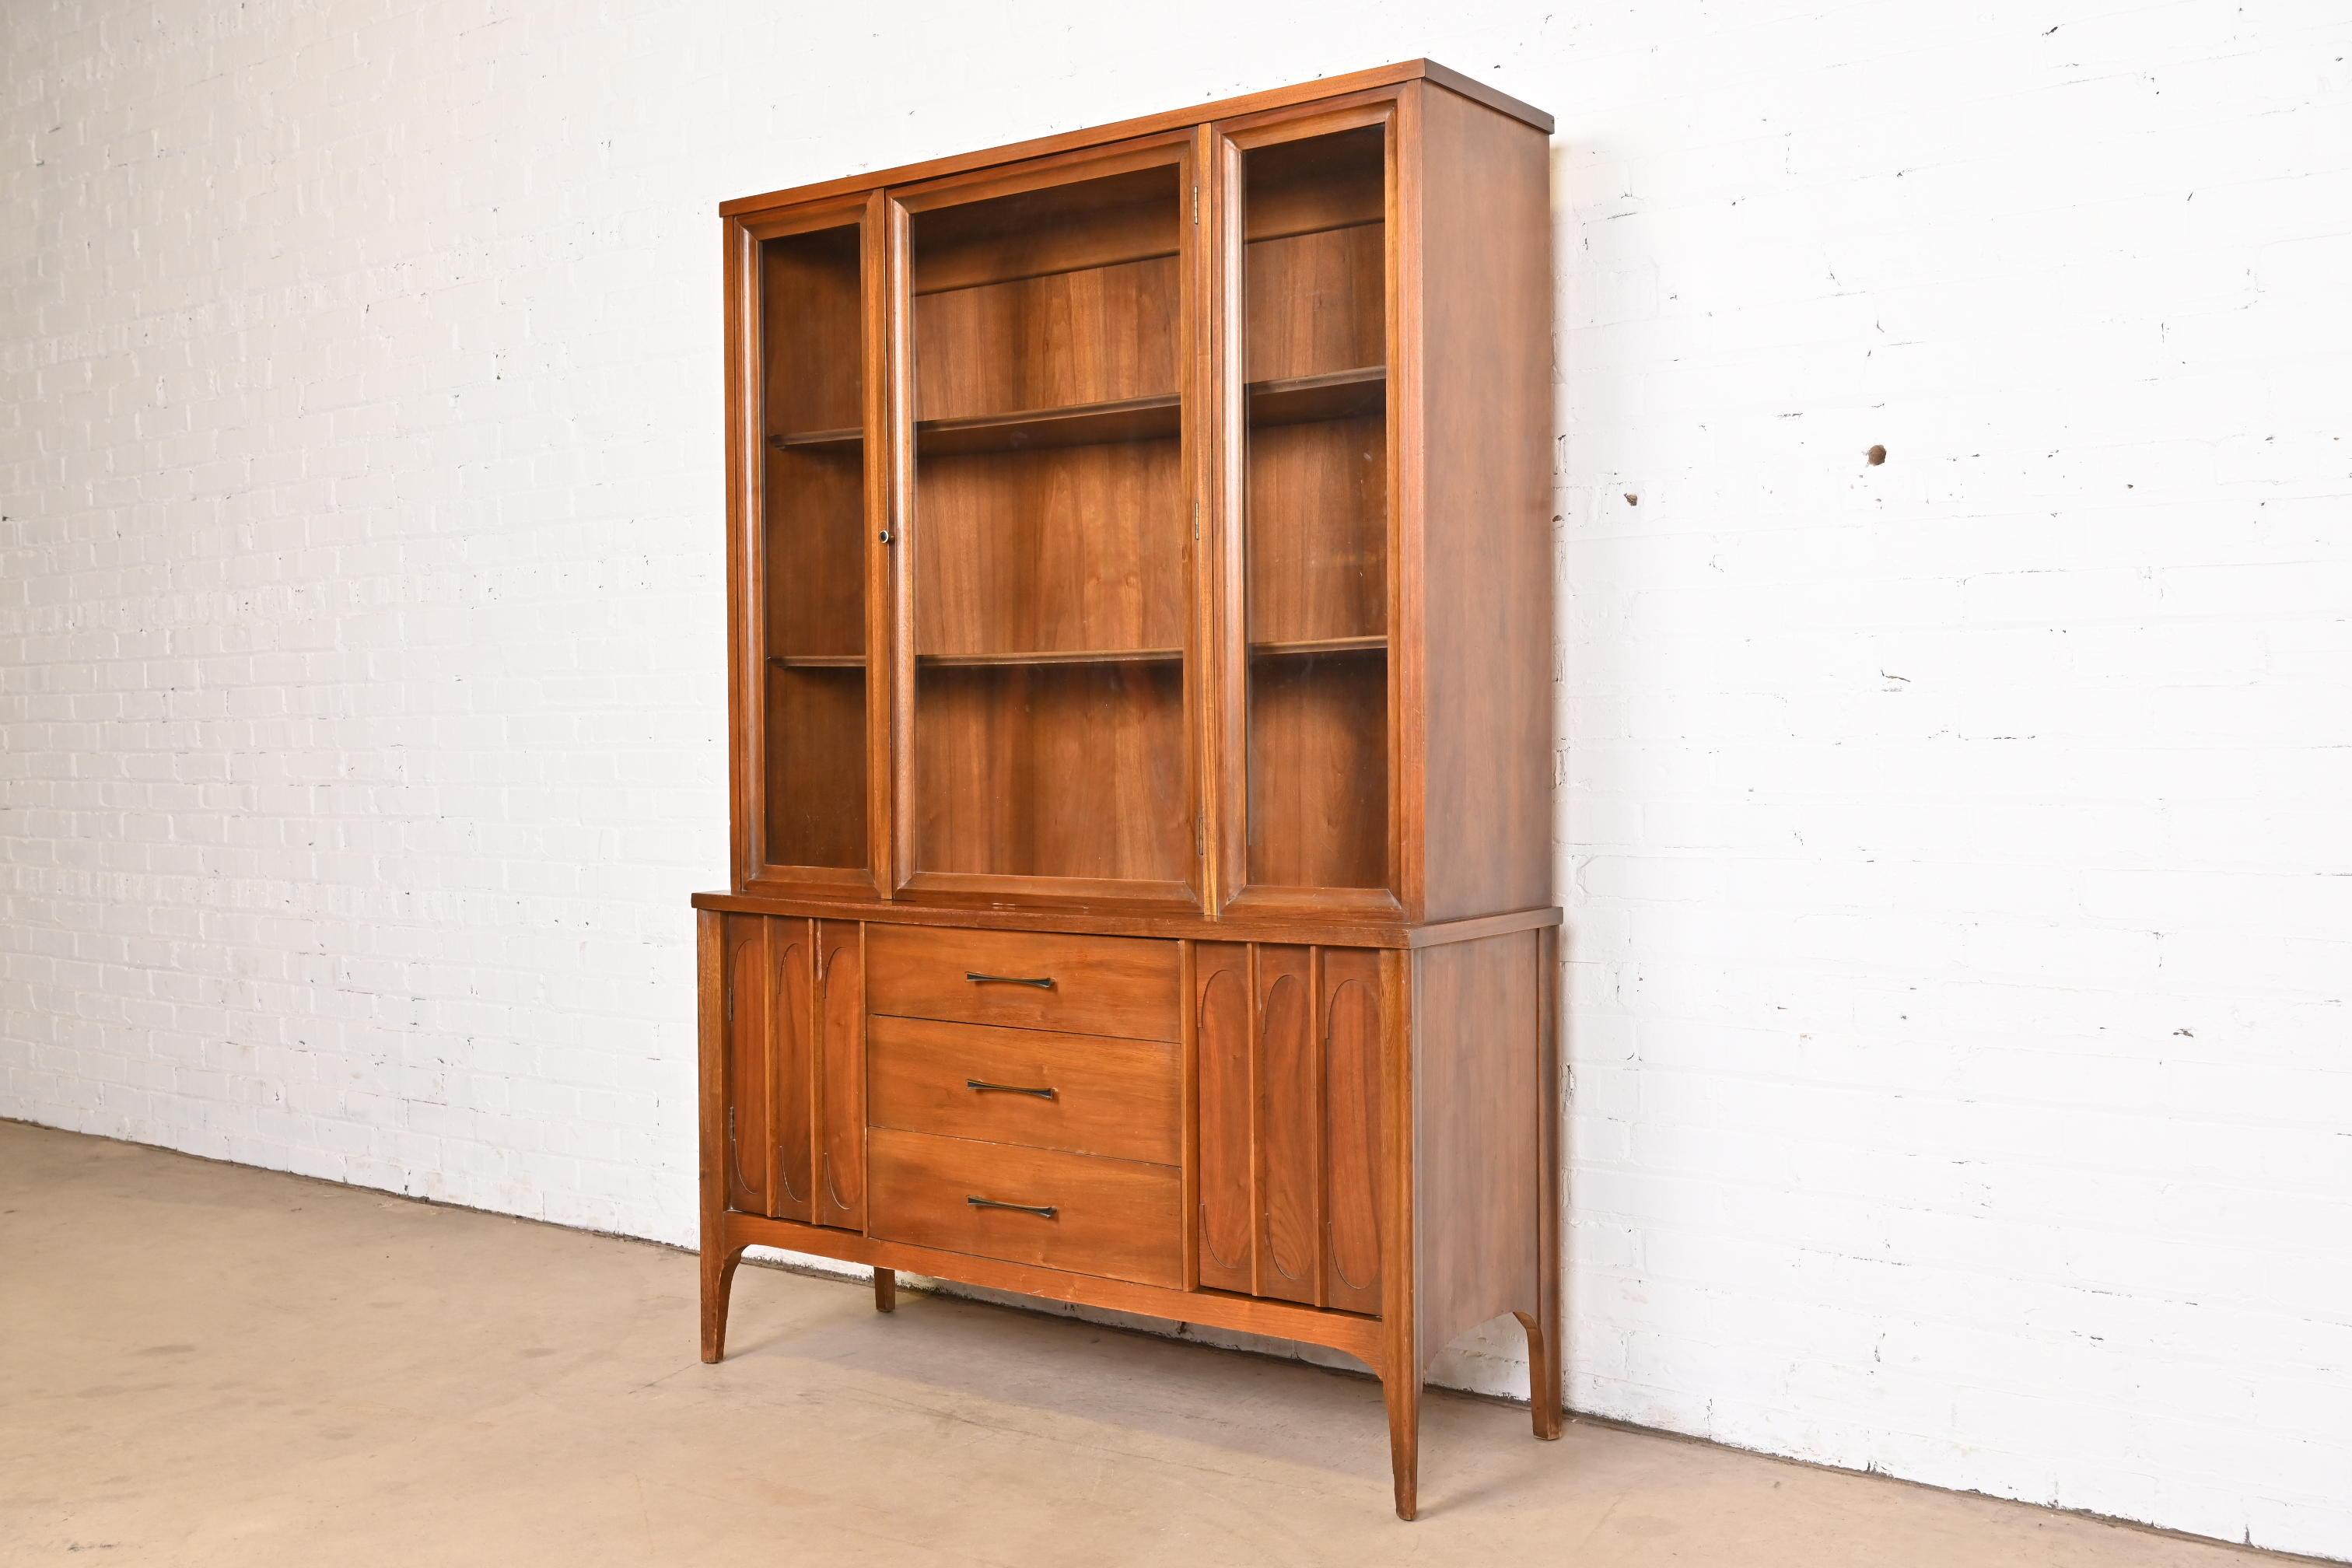 American Broyhill Brasilia Style Sculpted Walnut Breakfront Bookcase or China Cabinet